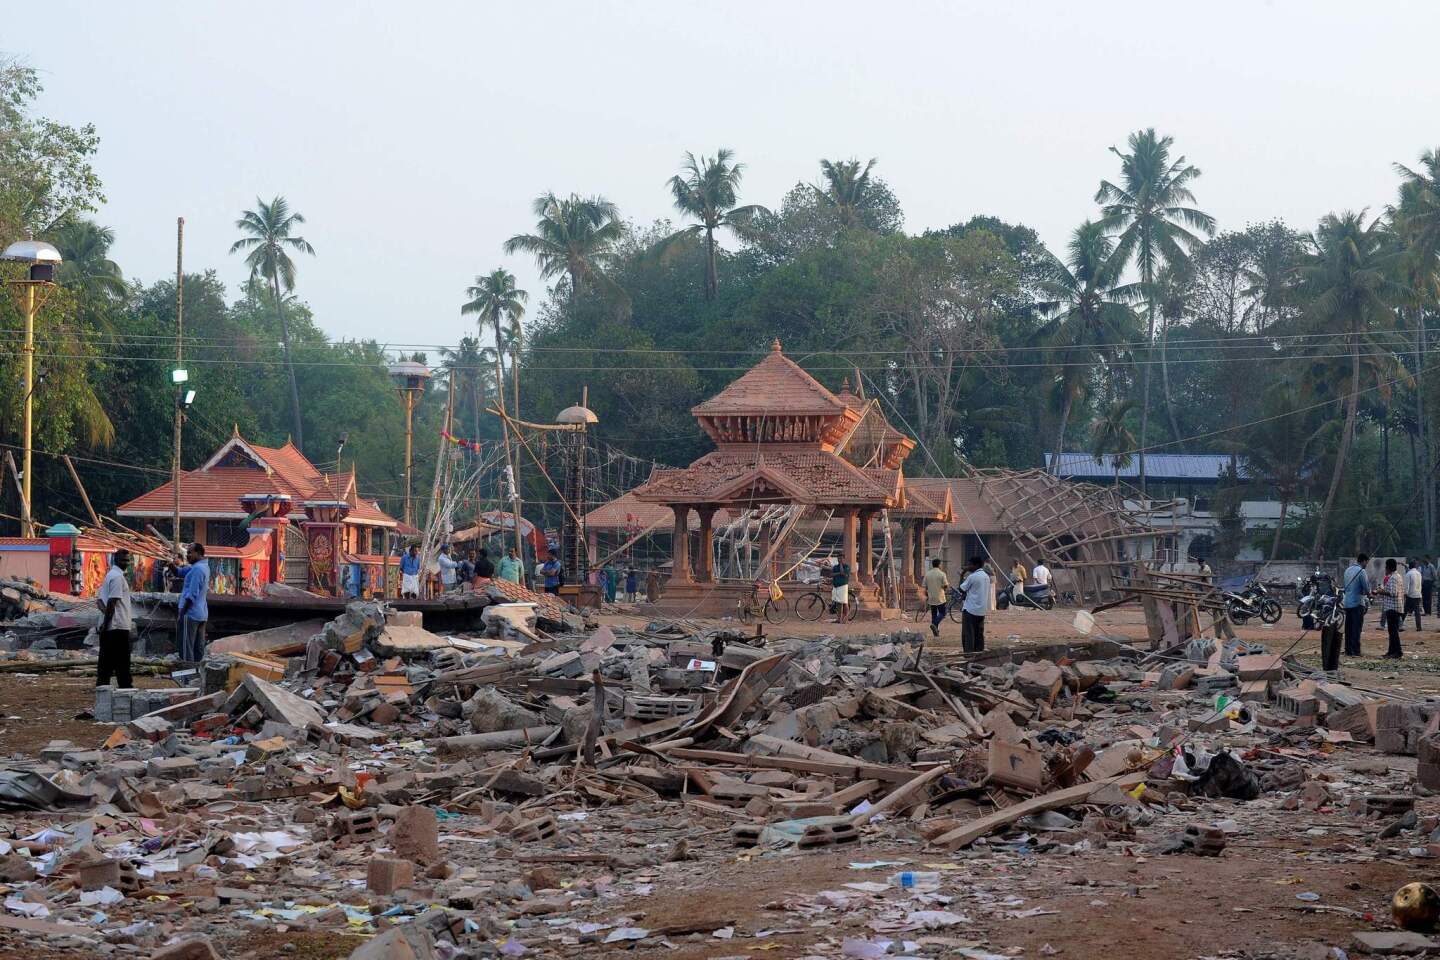 Indian bystanders gather among debris and building wreckage of The Puttingal Devi Temple in Paravur, India, on April 11, 2016.